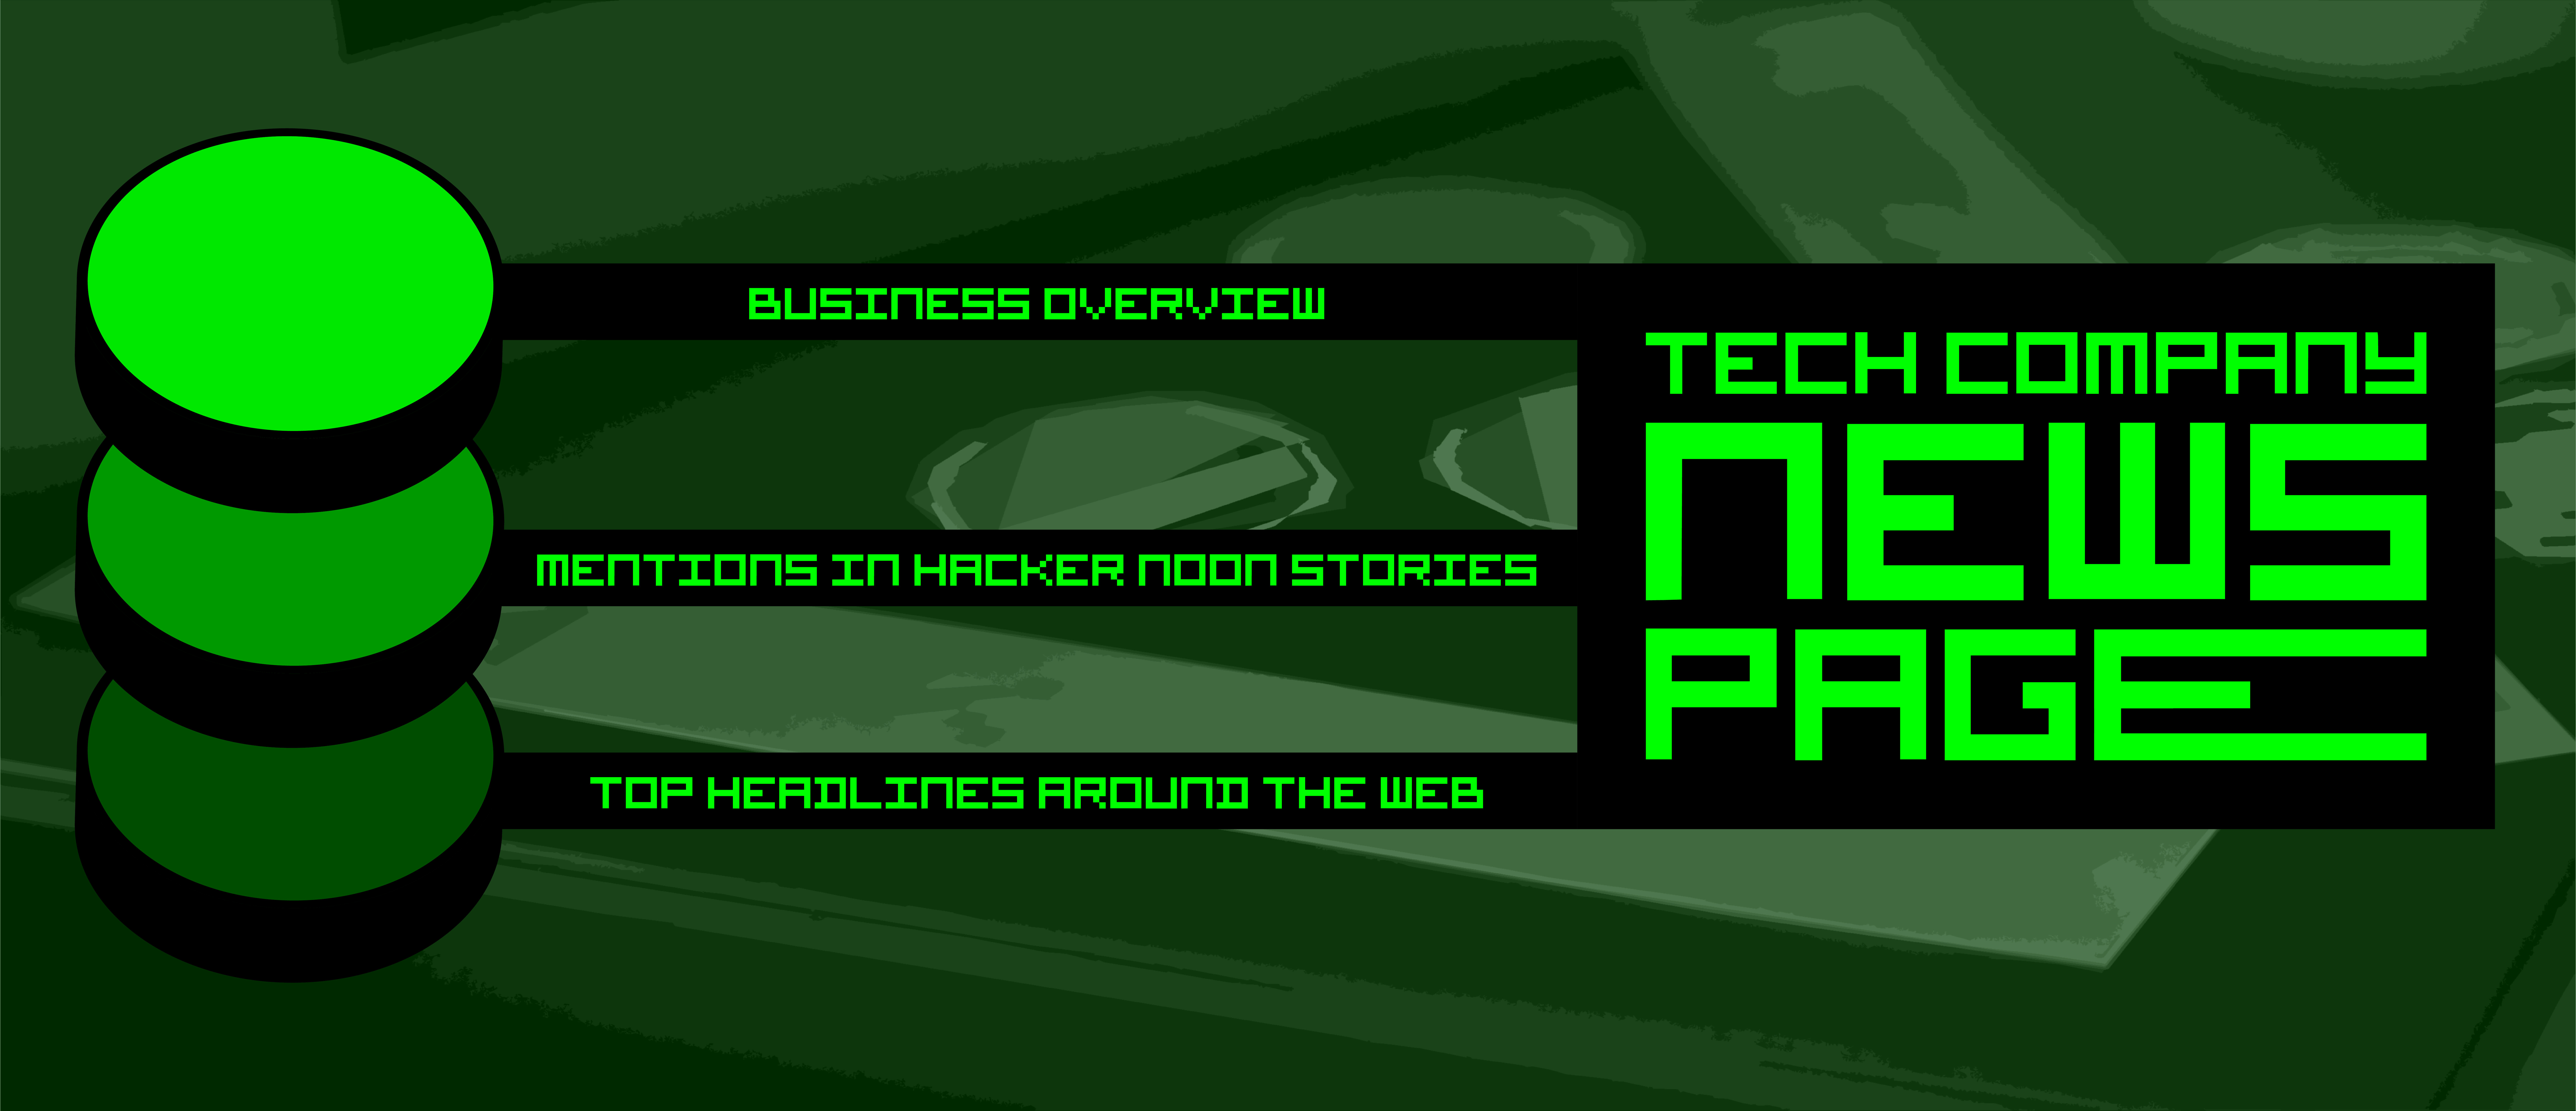 featured image - About Tech Company News Pages by Hacker Noon